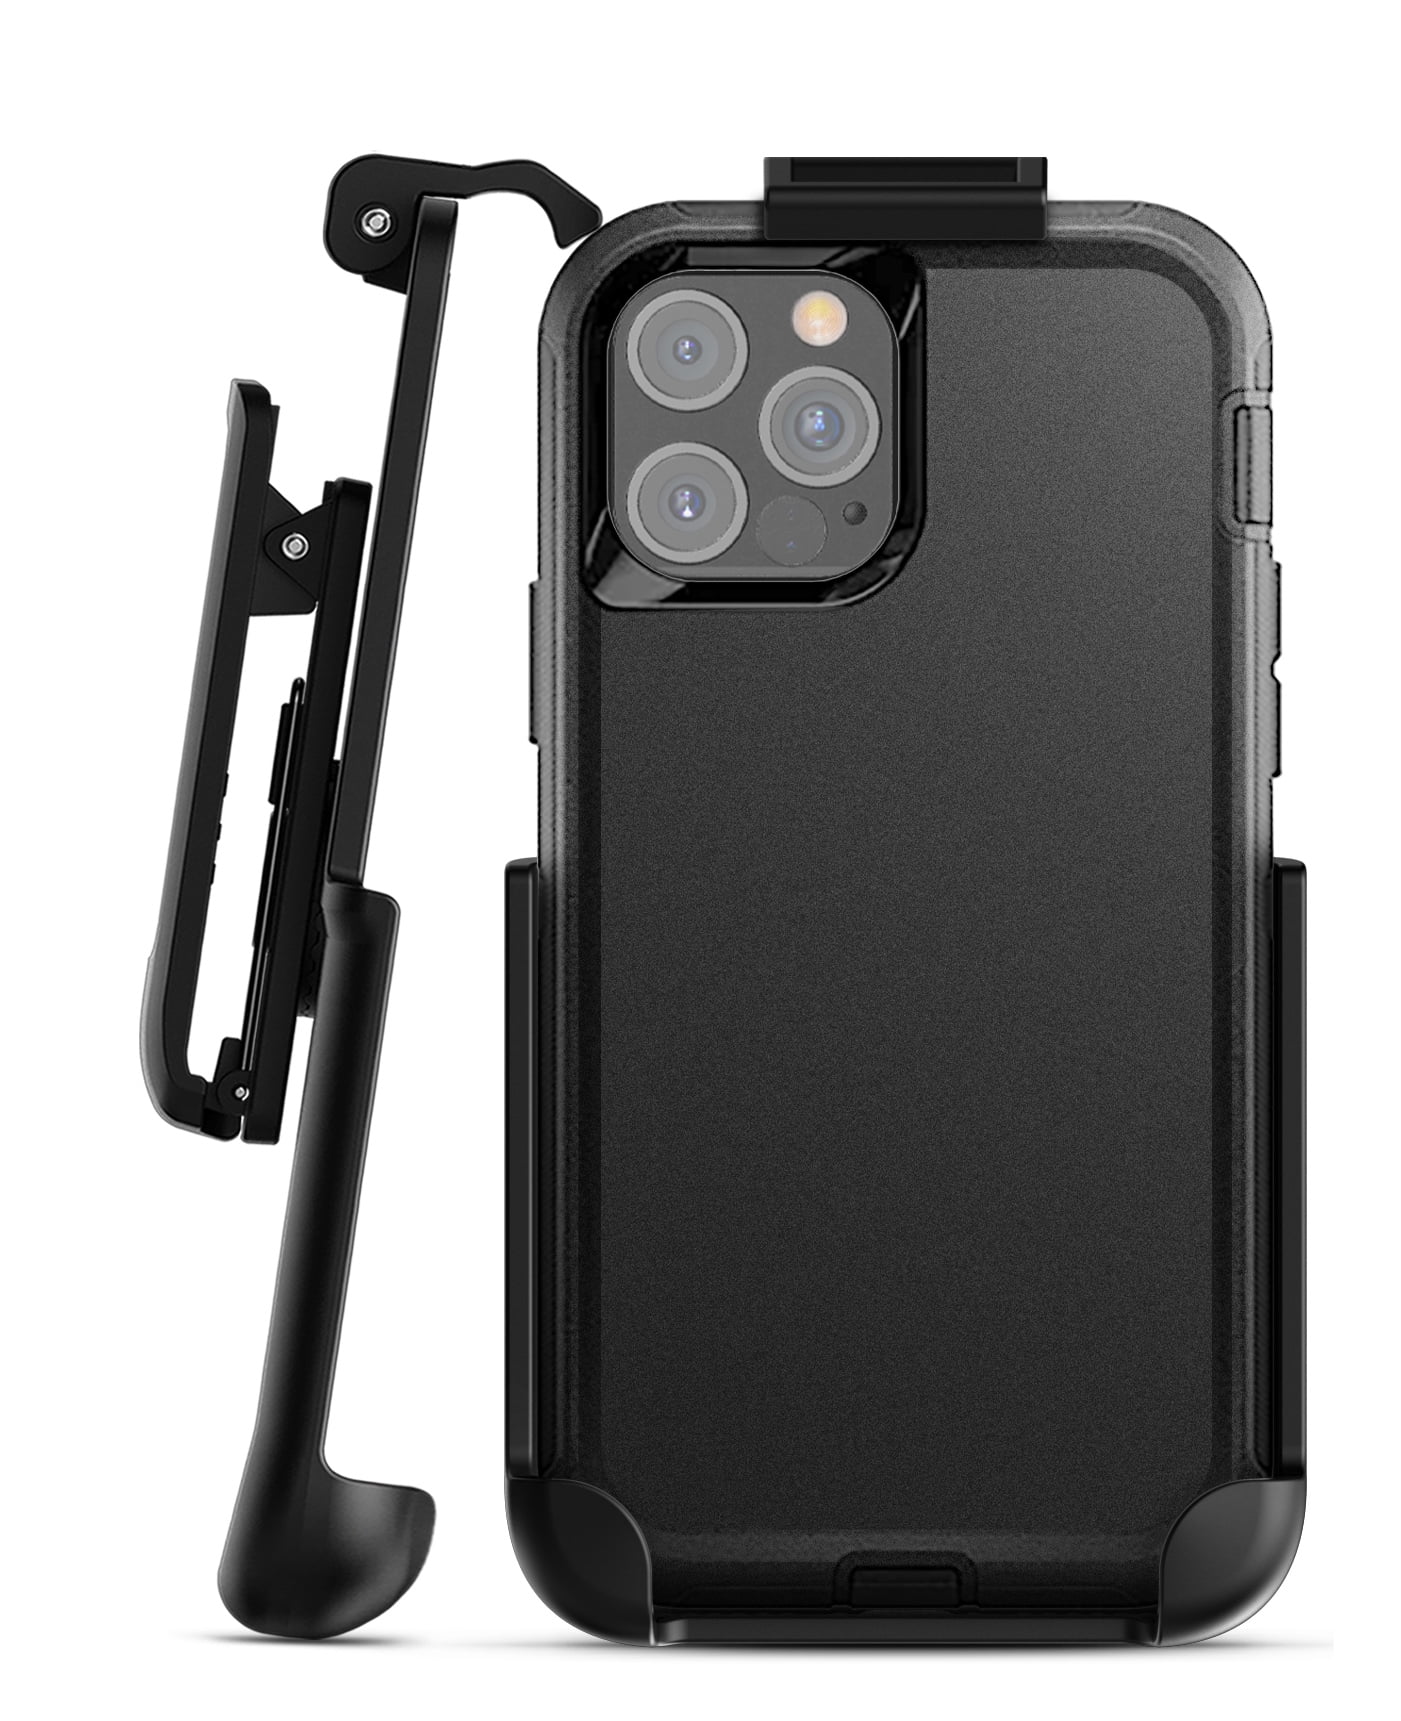 2 Pcs Replacement Holster Belt Clip for OtterBox Defender Series Case Apple iPhone 12 iPhone 12Pro 6.1 